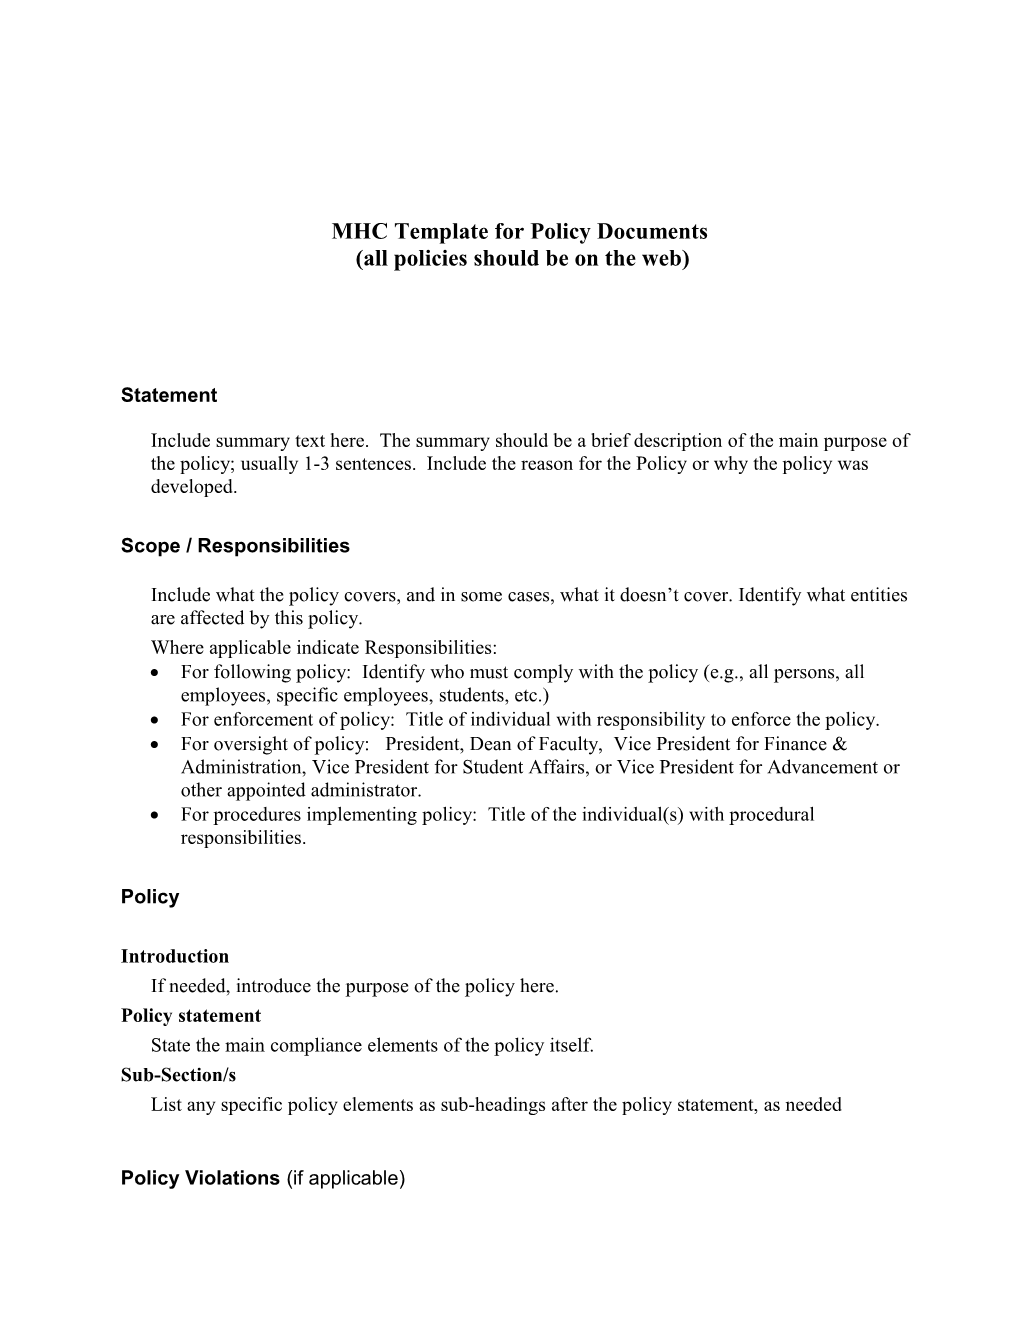 MHC Template for Policy Documents